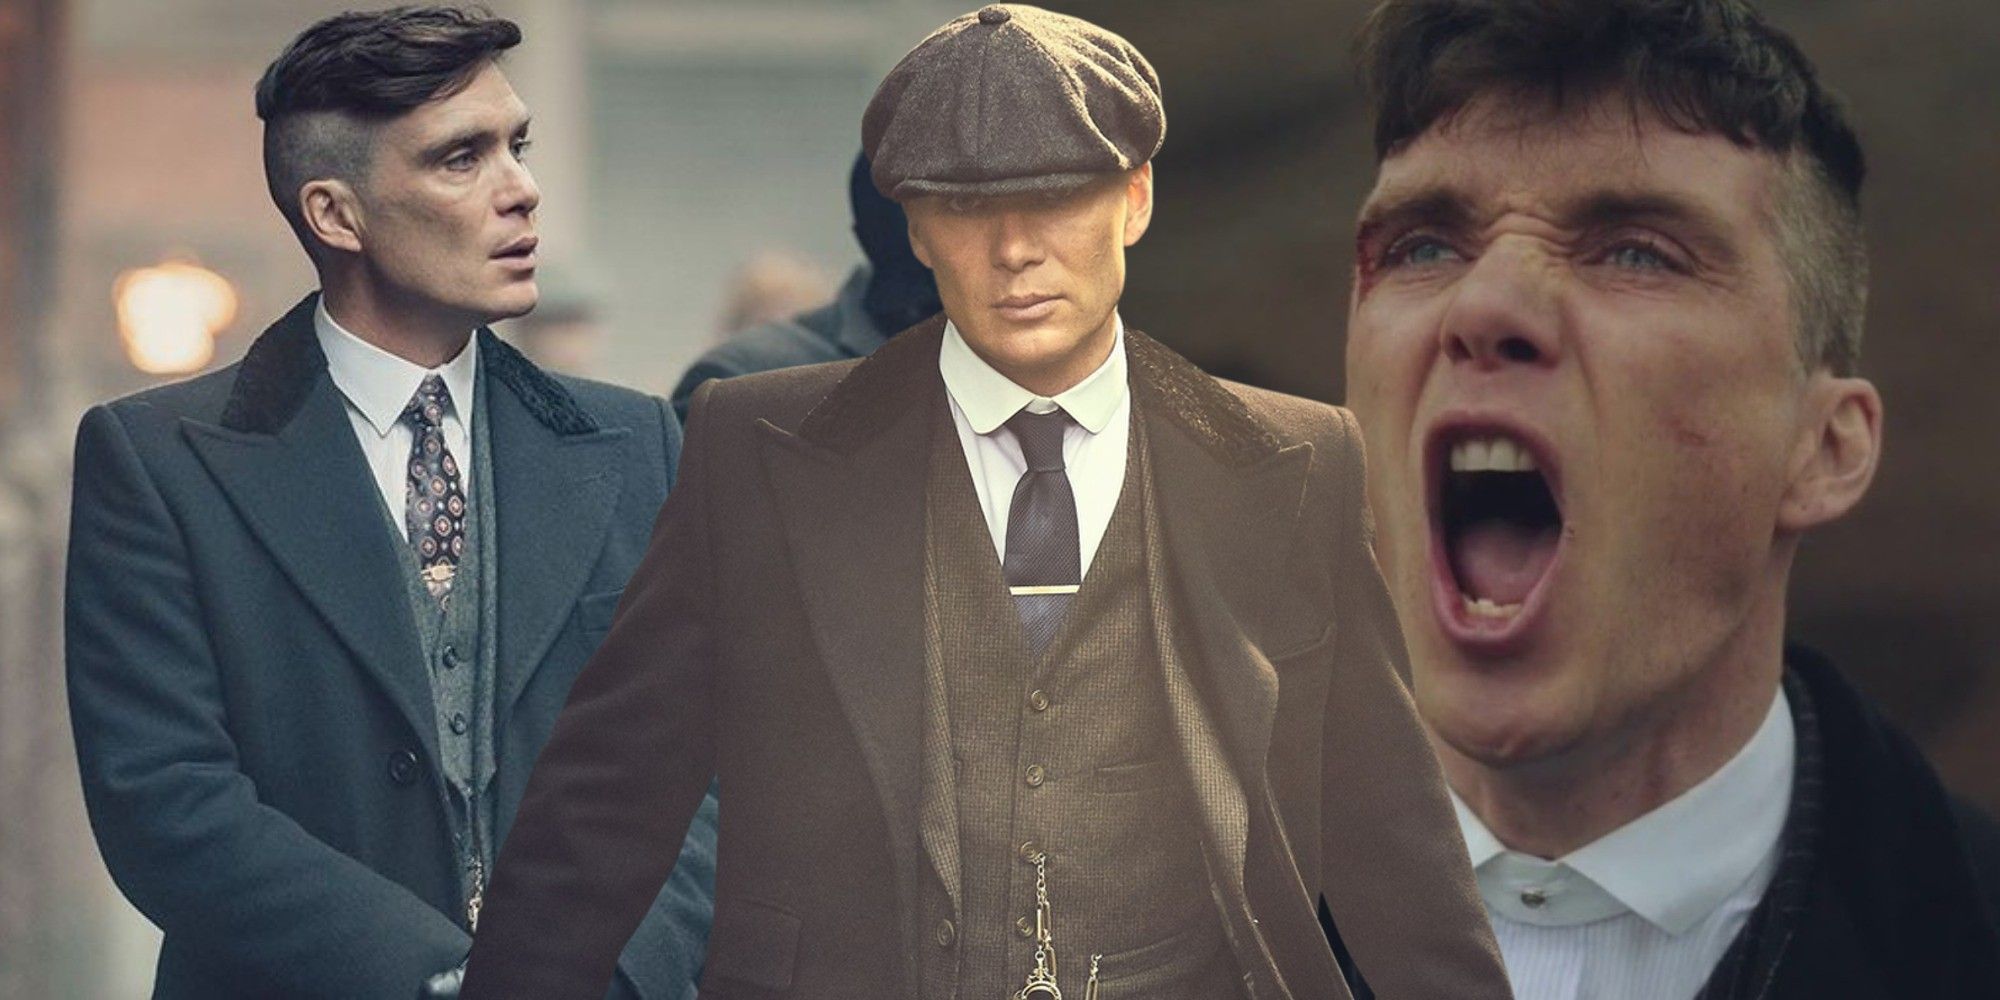 Dress Up Like Thomas Shelby from Peaky Blinders - Elemental Spot